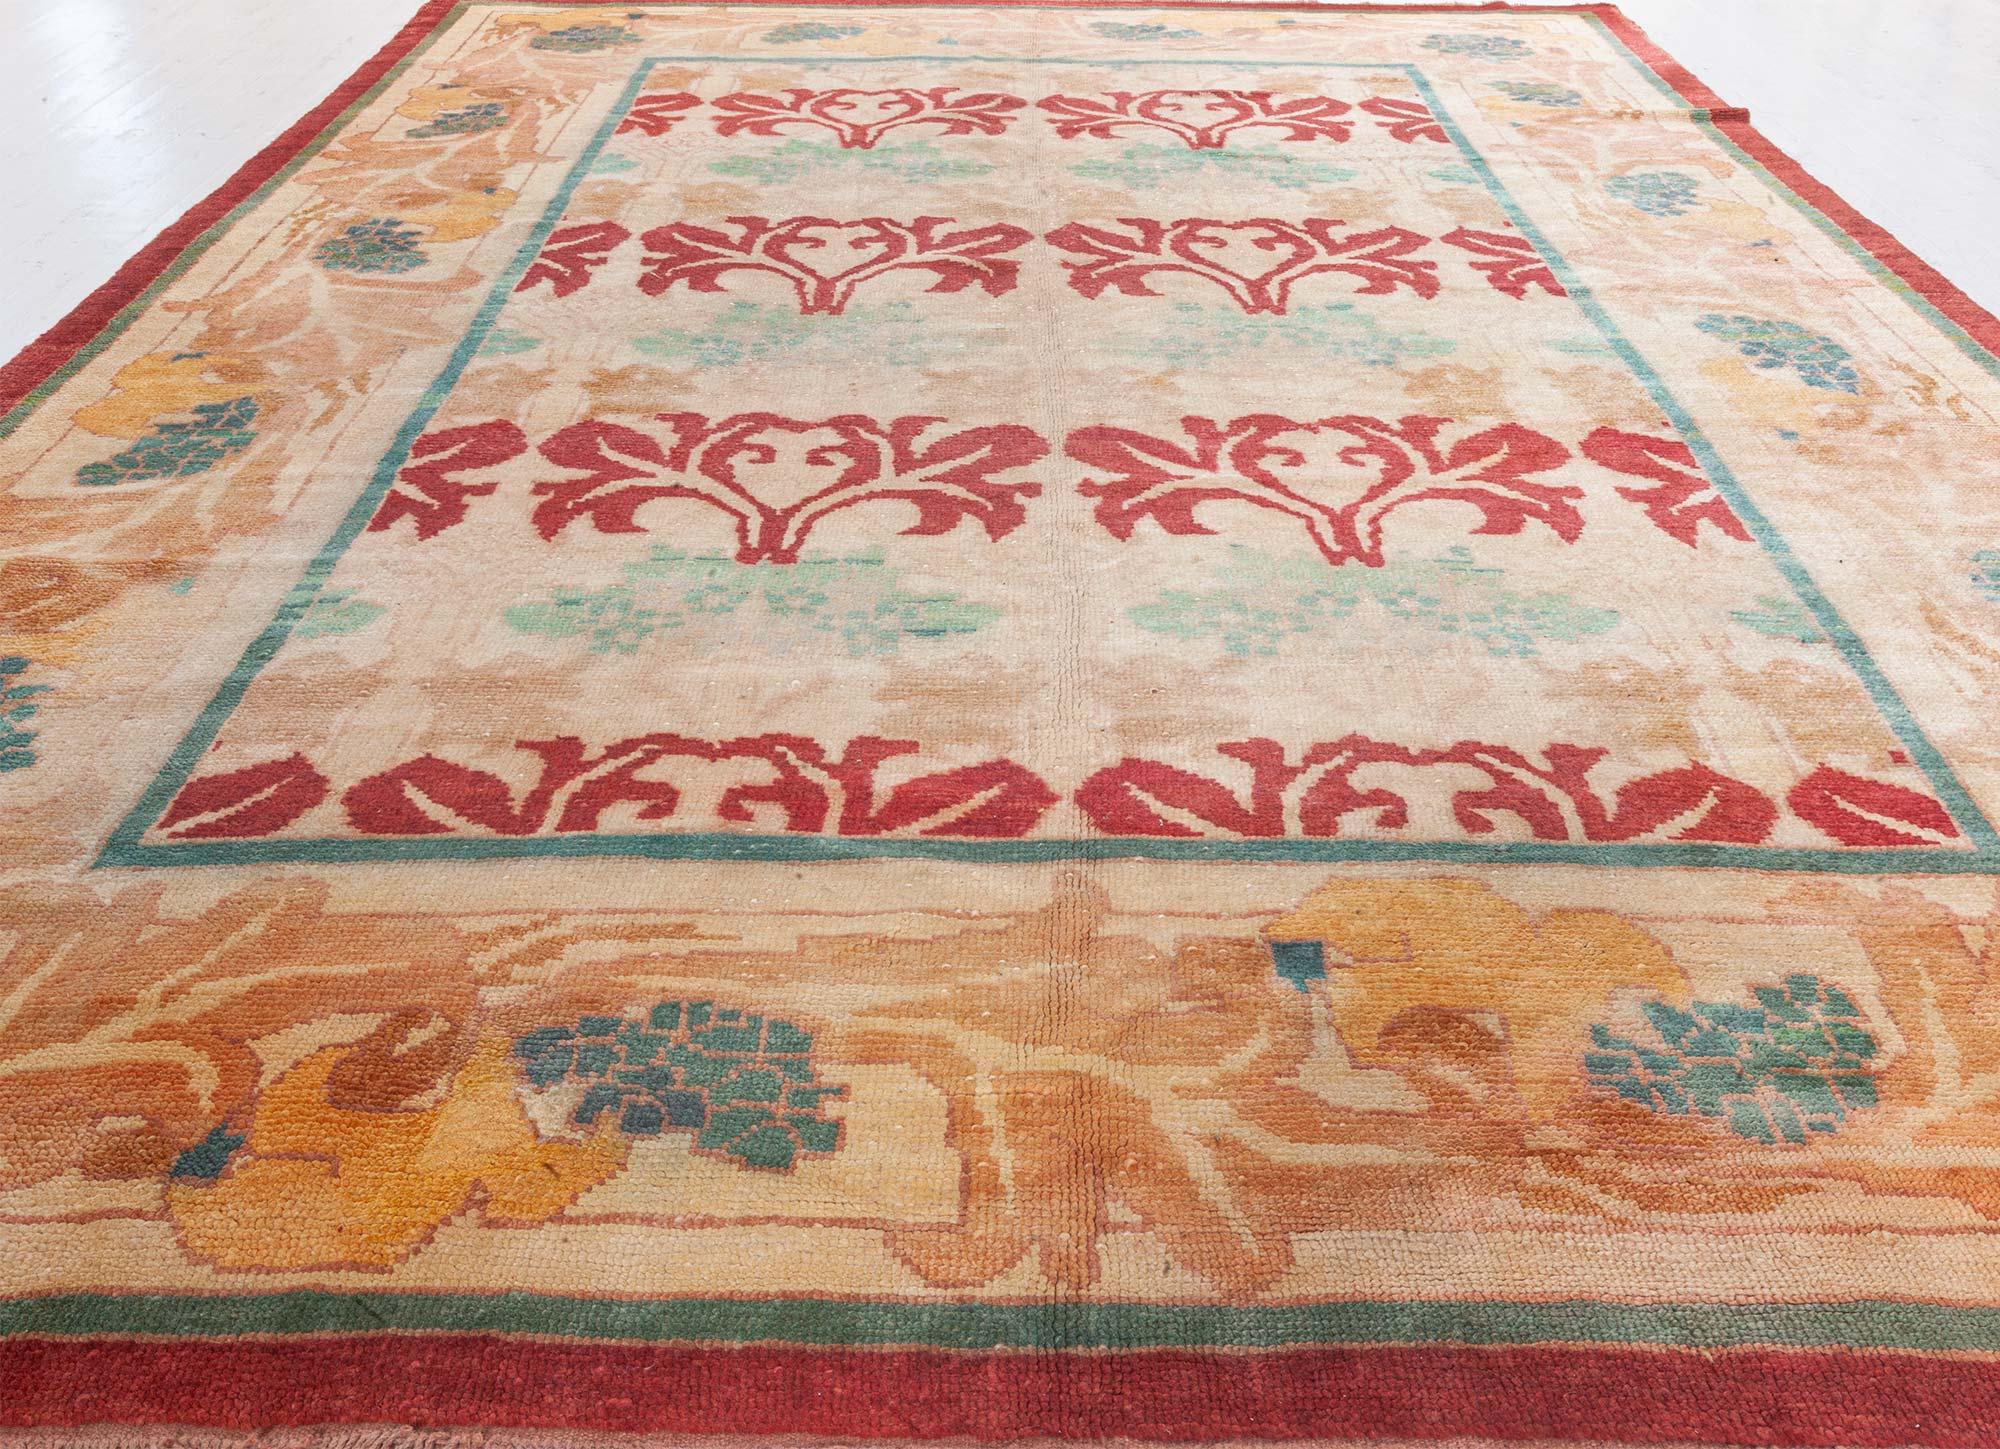 Northern Irish Arts and Crafts Rug For Sale